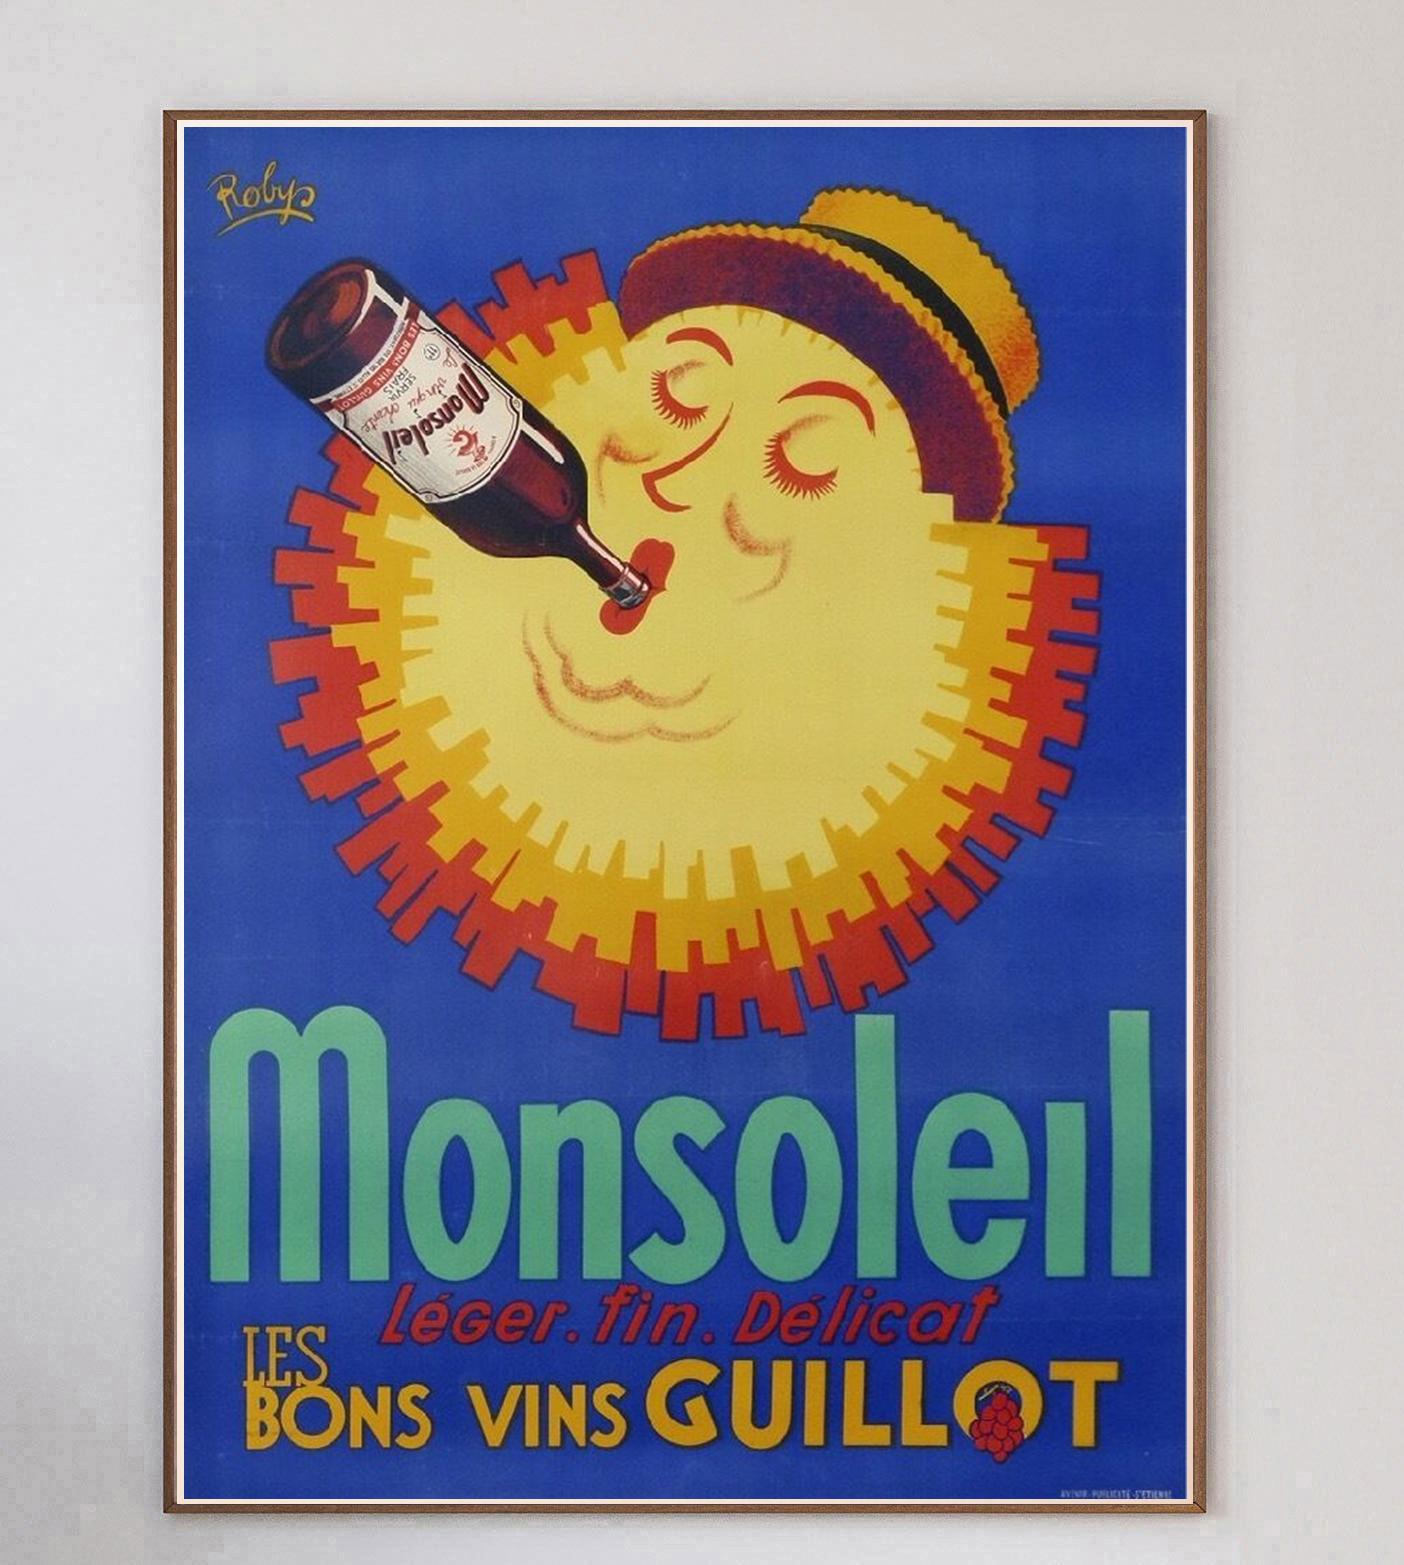 Stunning poster advertising the French wine Monsoleil. Created in 1930 and designed by poster artist Robert Wolff, better known as Robys, the piece is in mint condition and backed on museum quality linen to ensure its preservation for the decades to